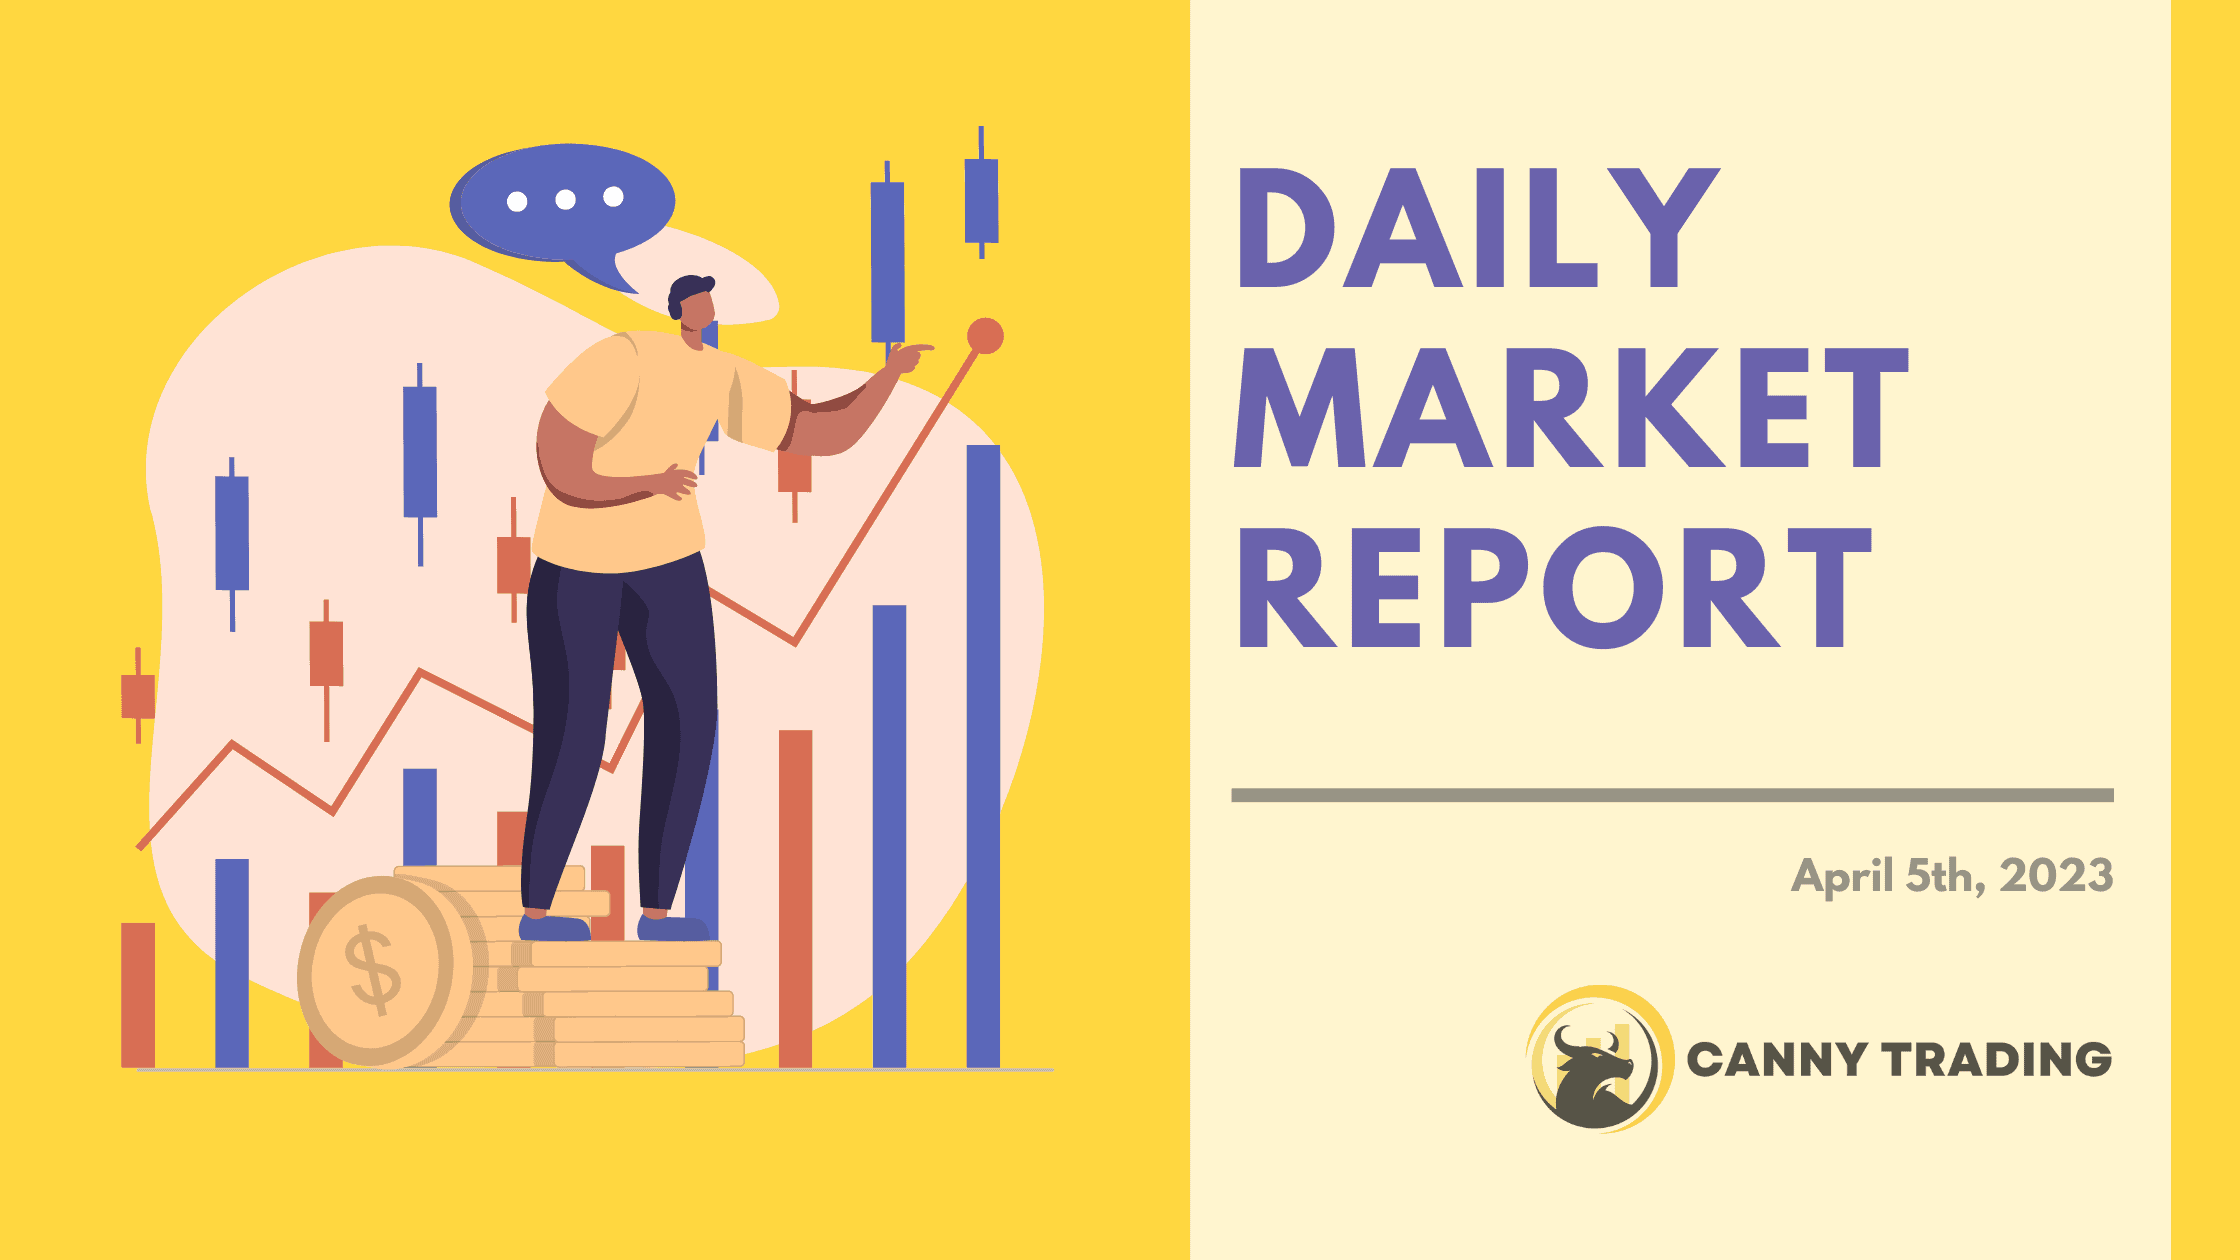 Daily Market Report April 5, 2023